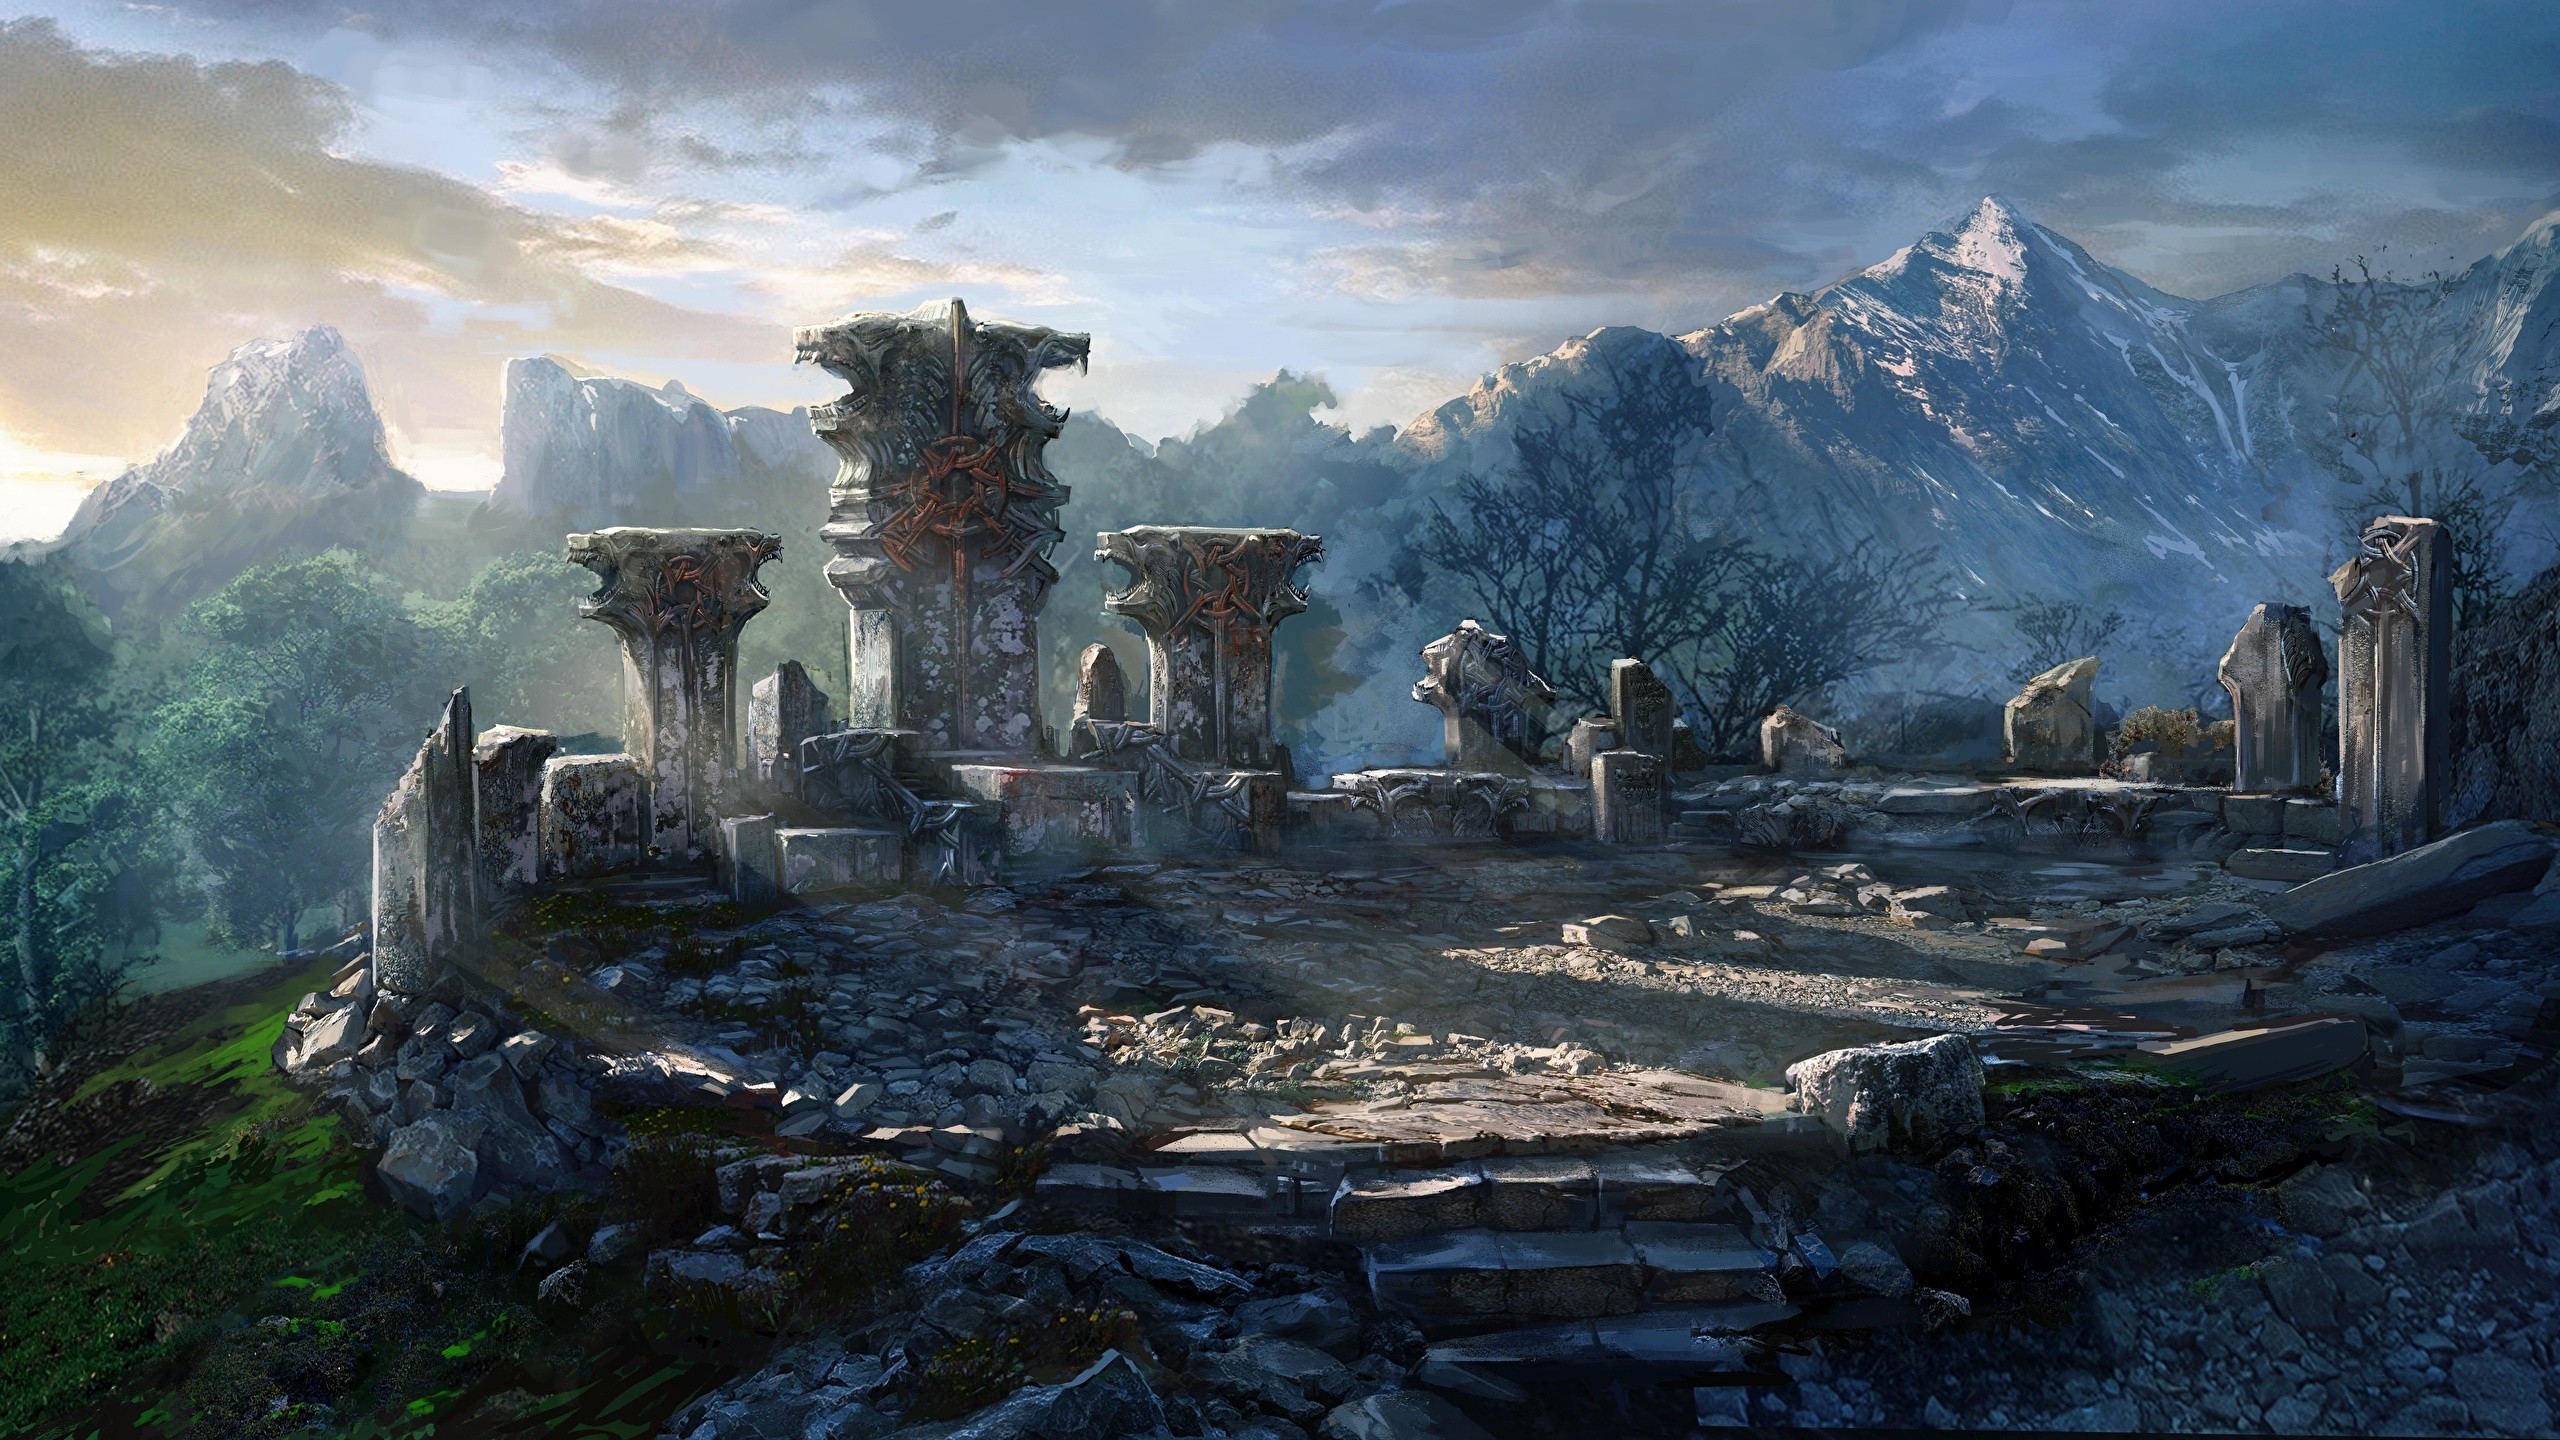 2560x1440 Images The Witcher 3: Wild Hunt Mountains Games Ruins 